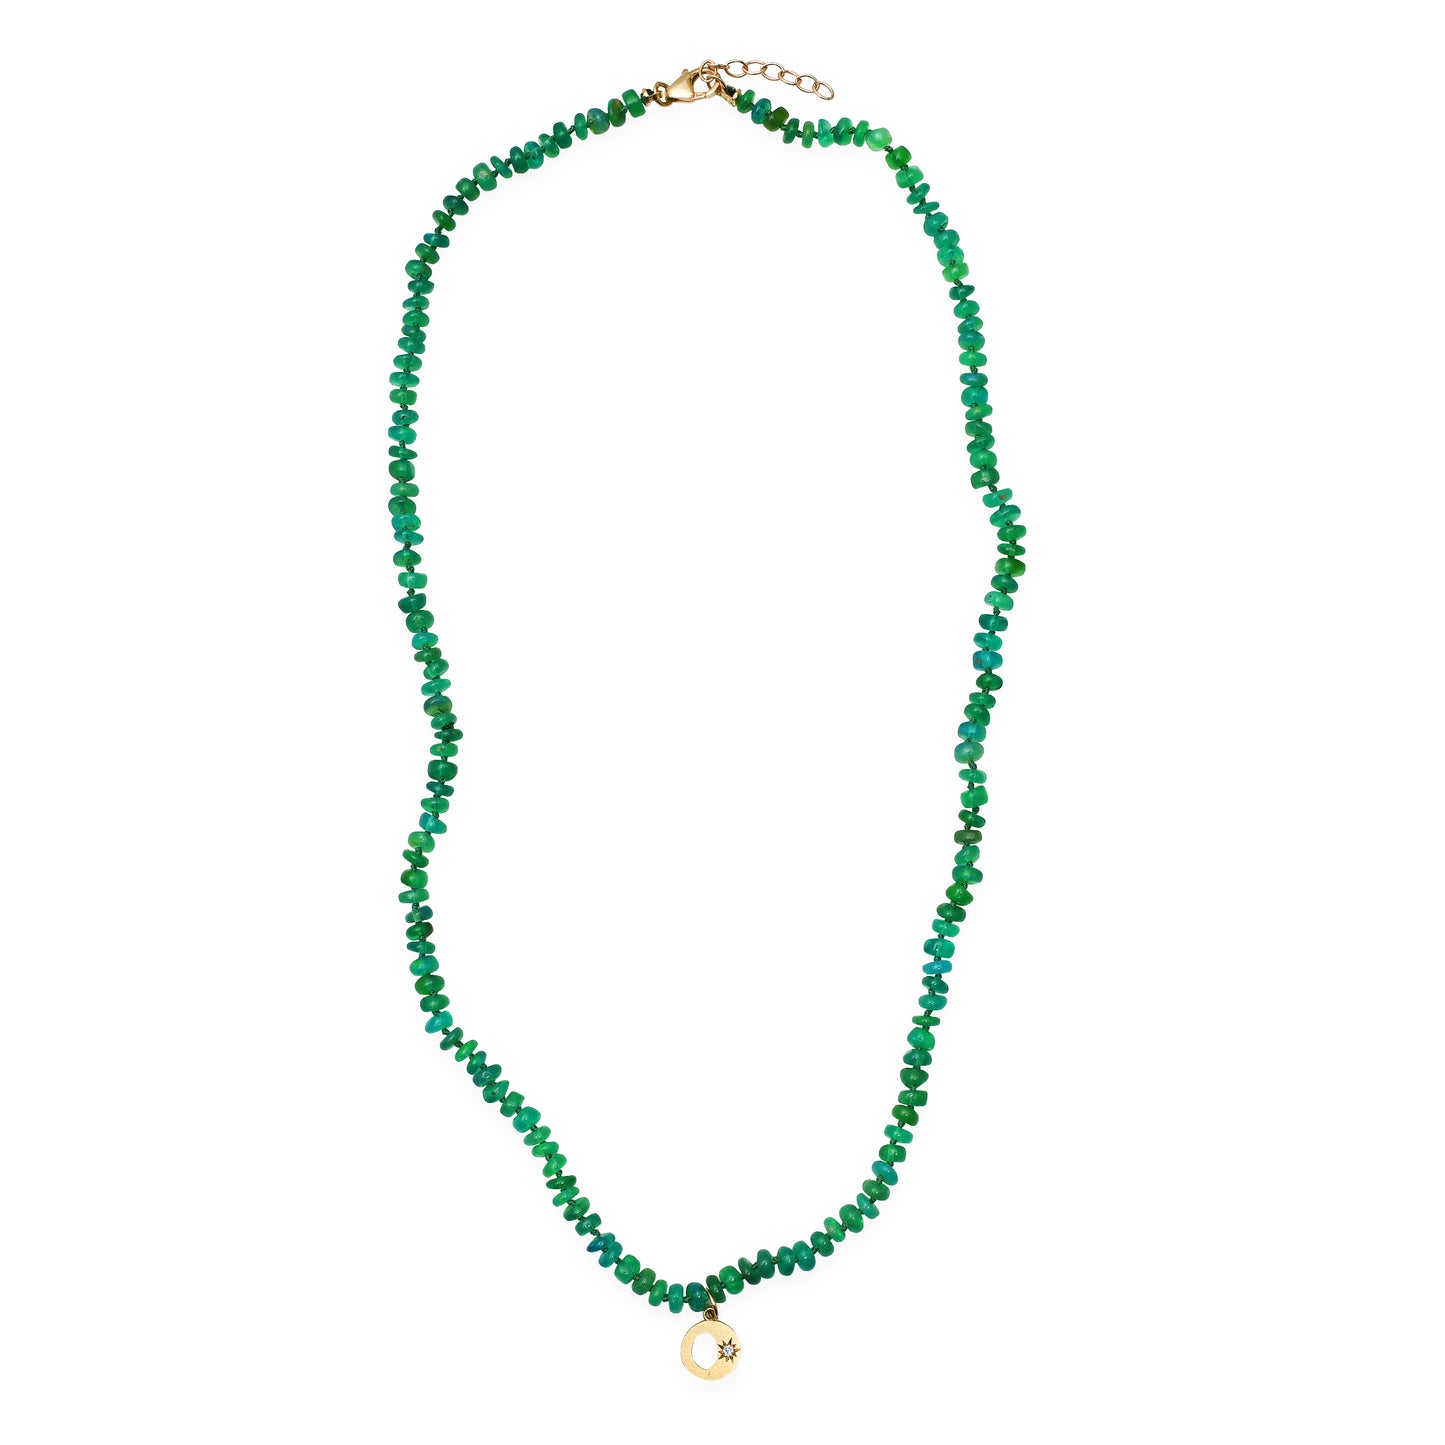 Green Ethiopian Opal Beaded Necklace with Waning Charm